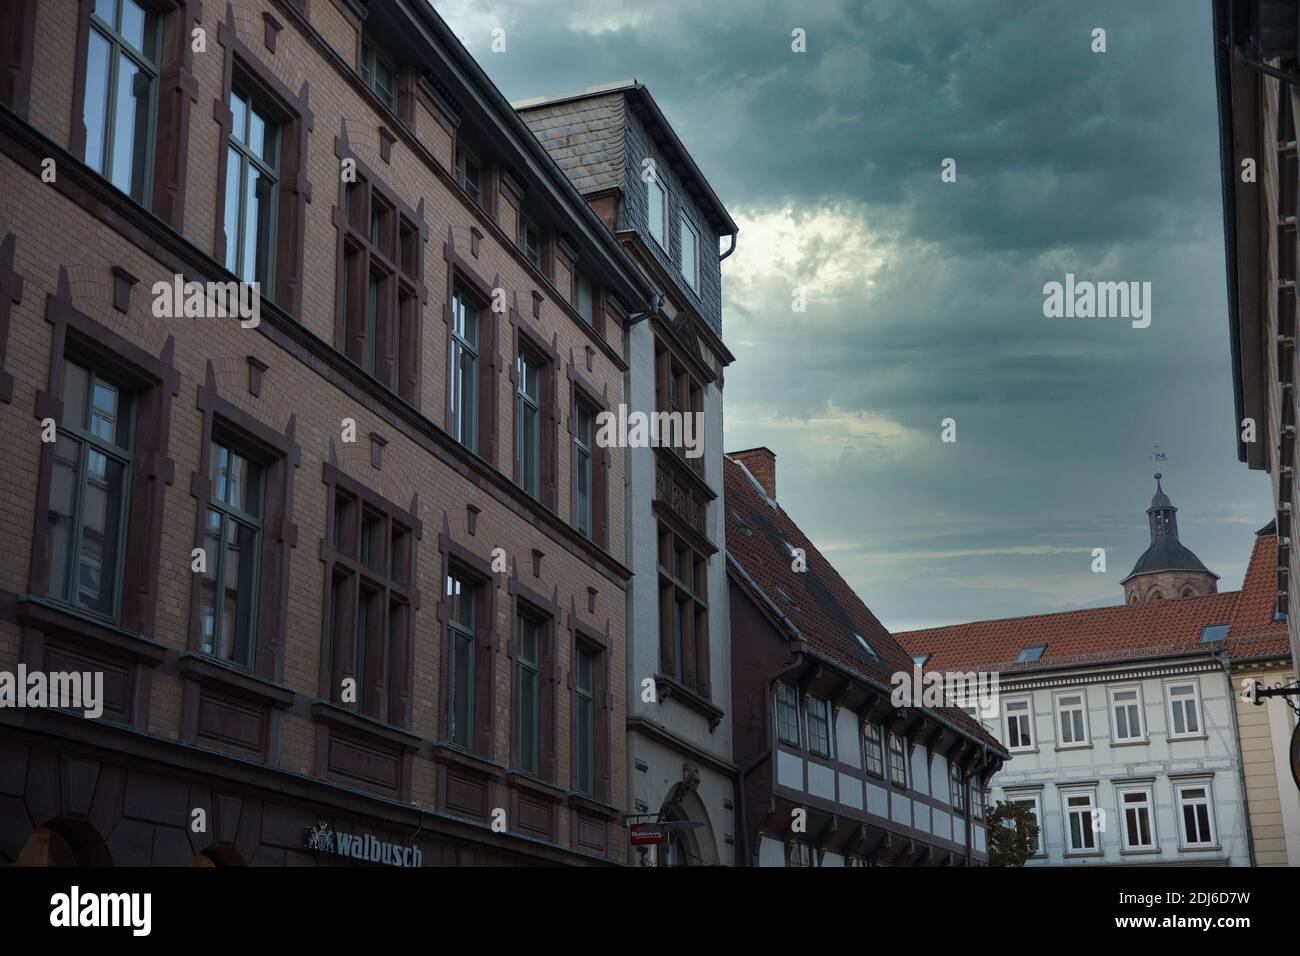 Gottingen Germany. Autumn, 2020. Residential architecture in historical city centre with morning sky. Stock Photo